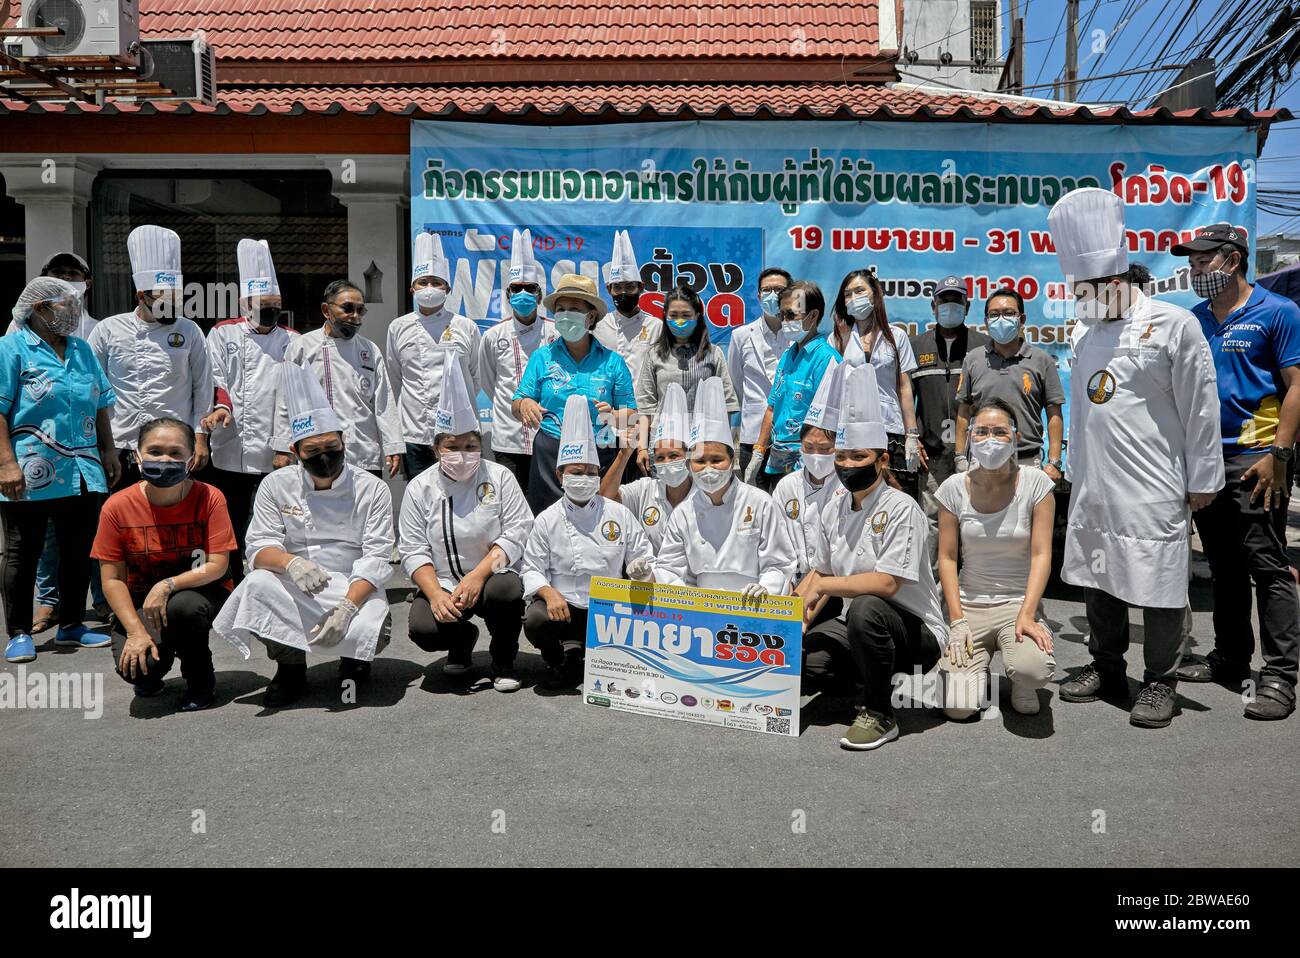 Covid-19 Food.  Group of chefs who helped in the provision of Free food handout to people in need due to loss of income from Coronavirus Thailand Stock Photo